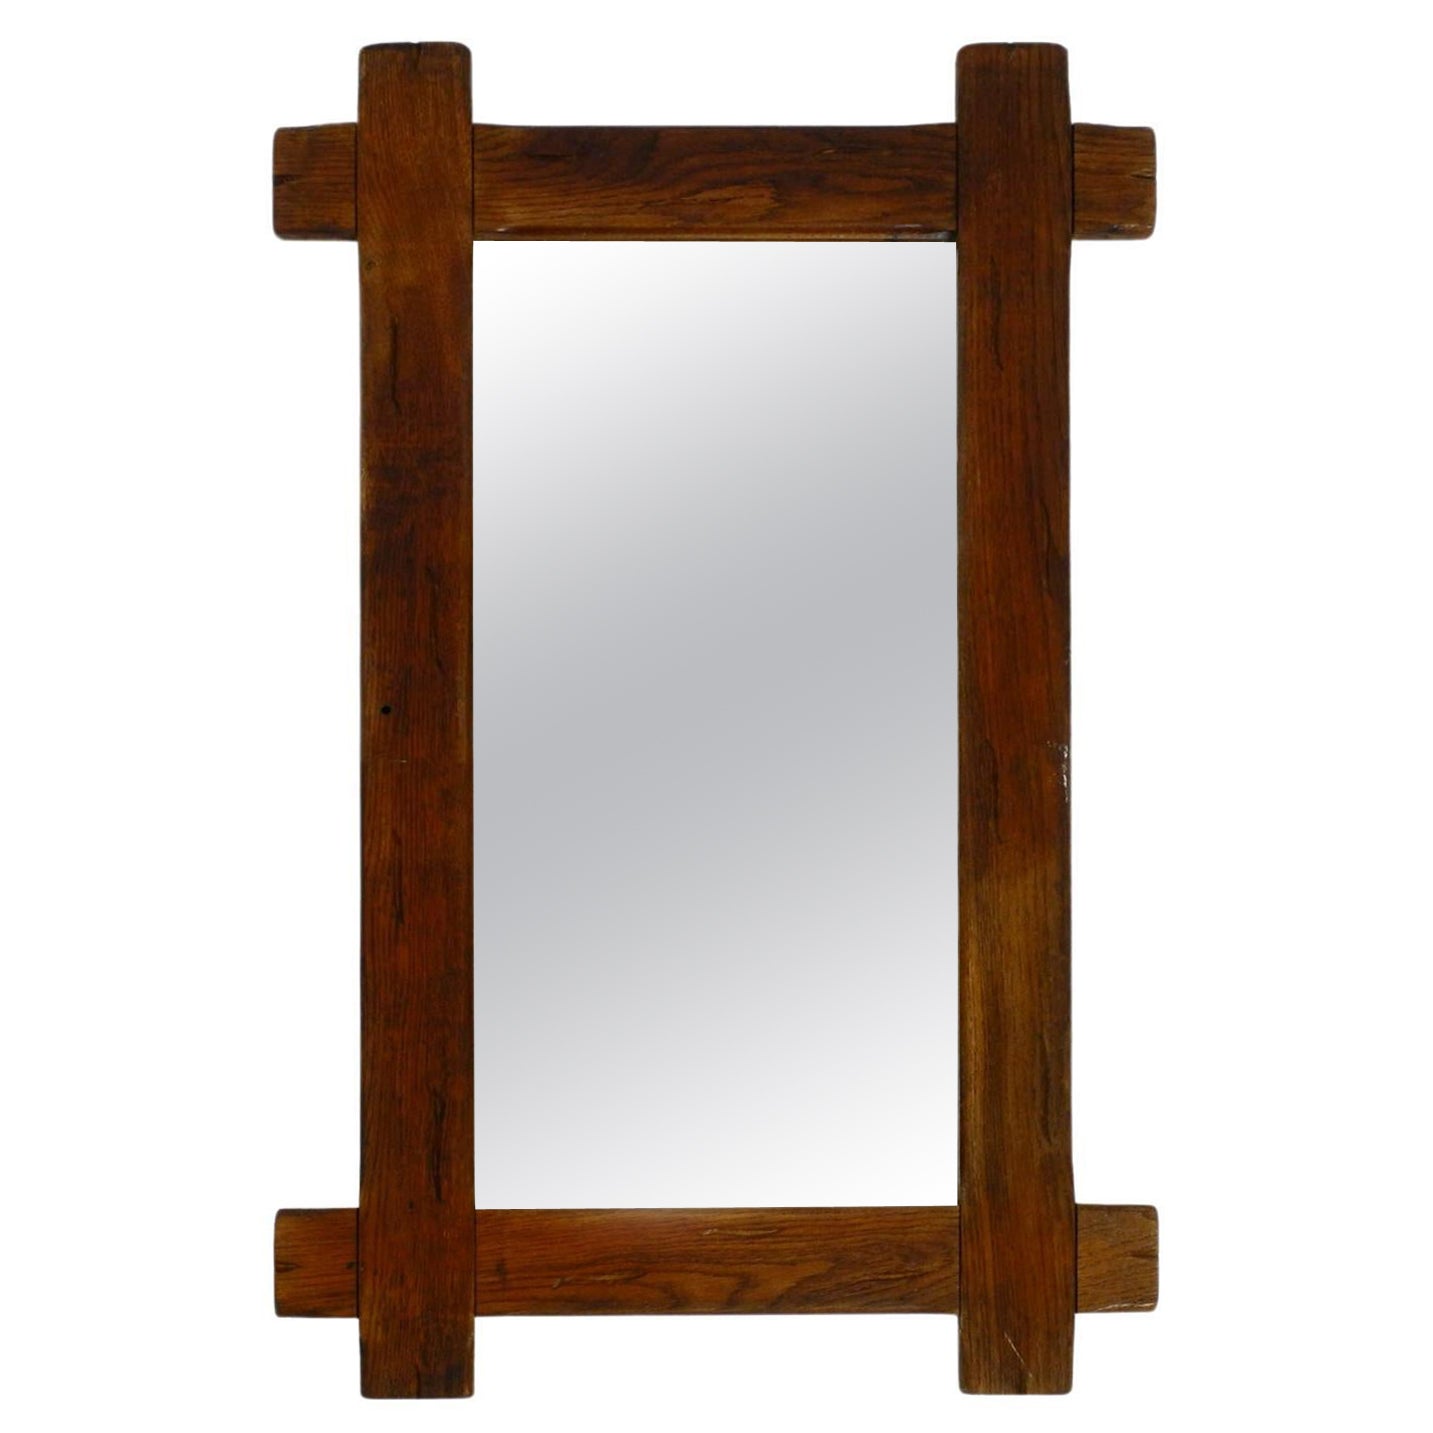 Beautiful Large 1930's Wall Mirror with a Dark Solid Oak Frame